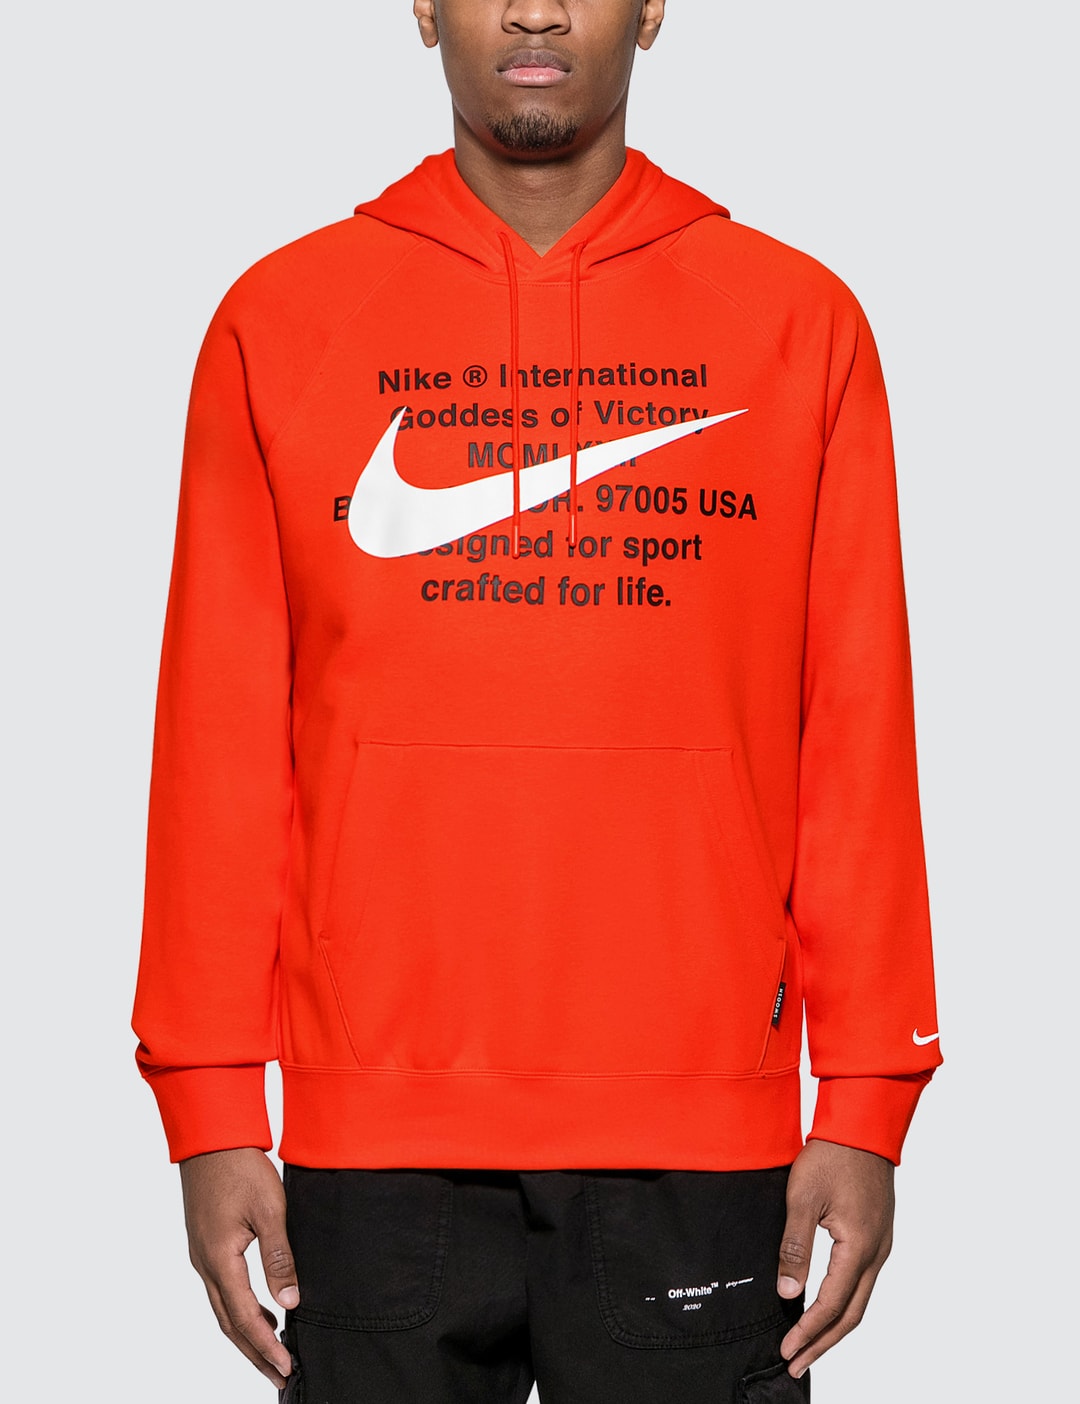 Nike - Nike Sportswear Swoosh | HBX - Globally Curated Fashion and Lifestyle by Hypebeast